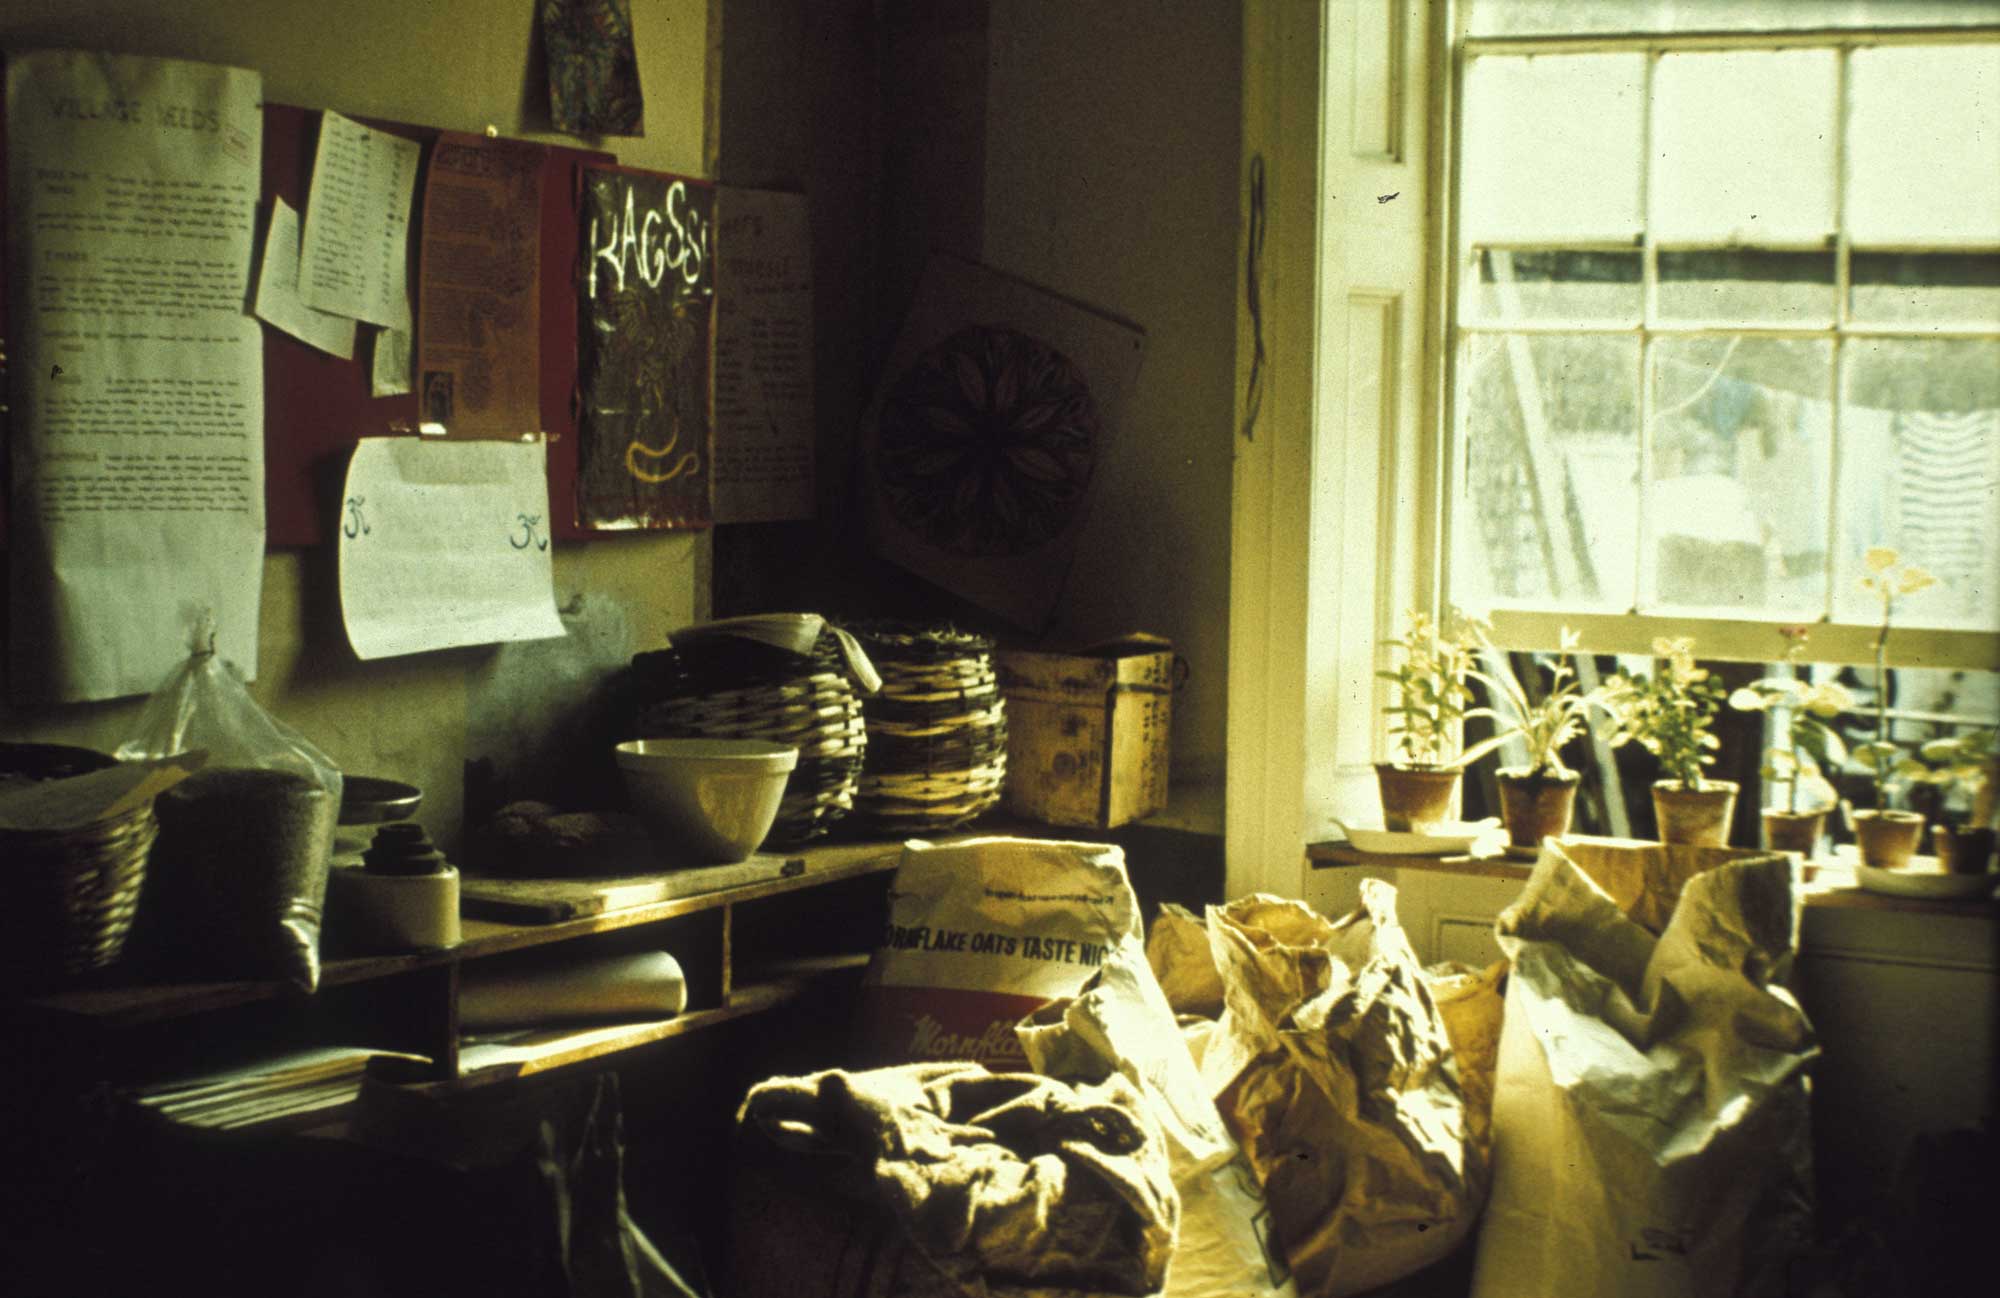 Food store, Community House, 213 North Gower Street, 1975